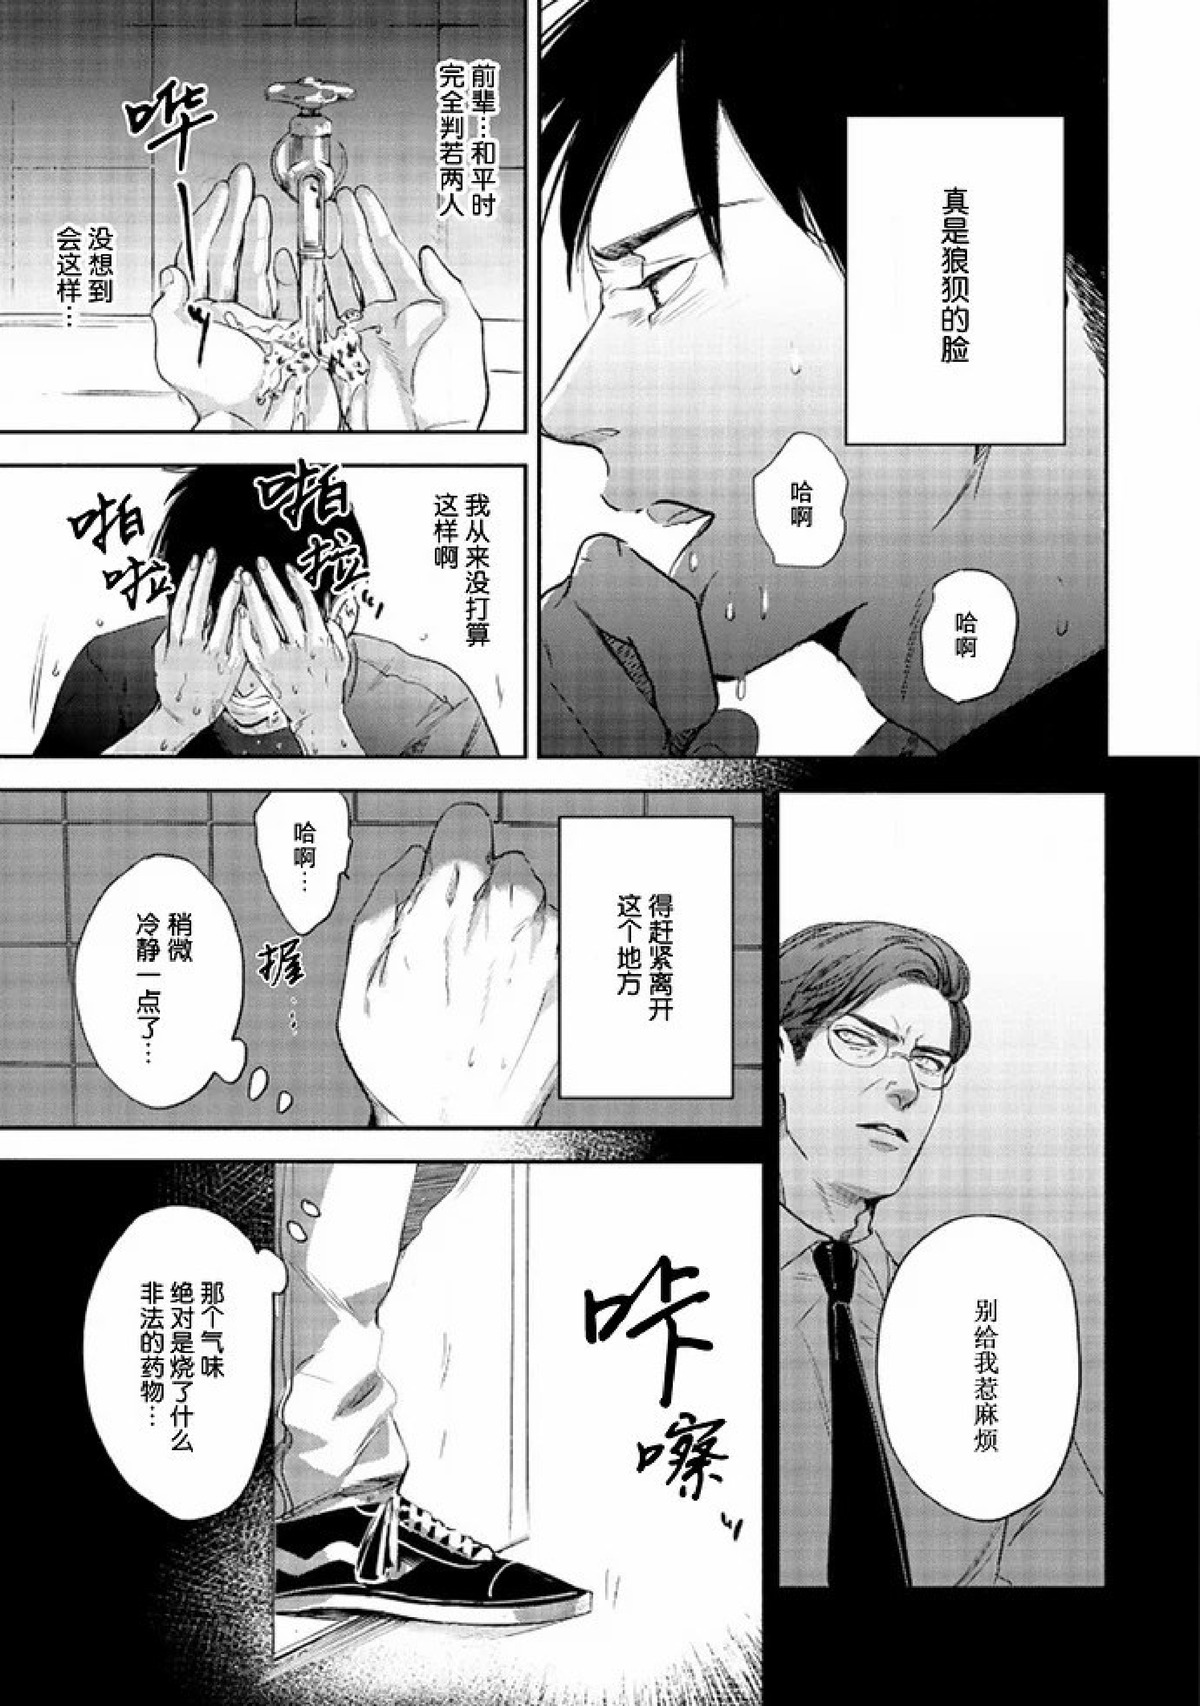 【Two sides of the same coin[腐漫]】漫画-（上卷01-02）章节漫画下拉式图片-49.jpg